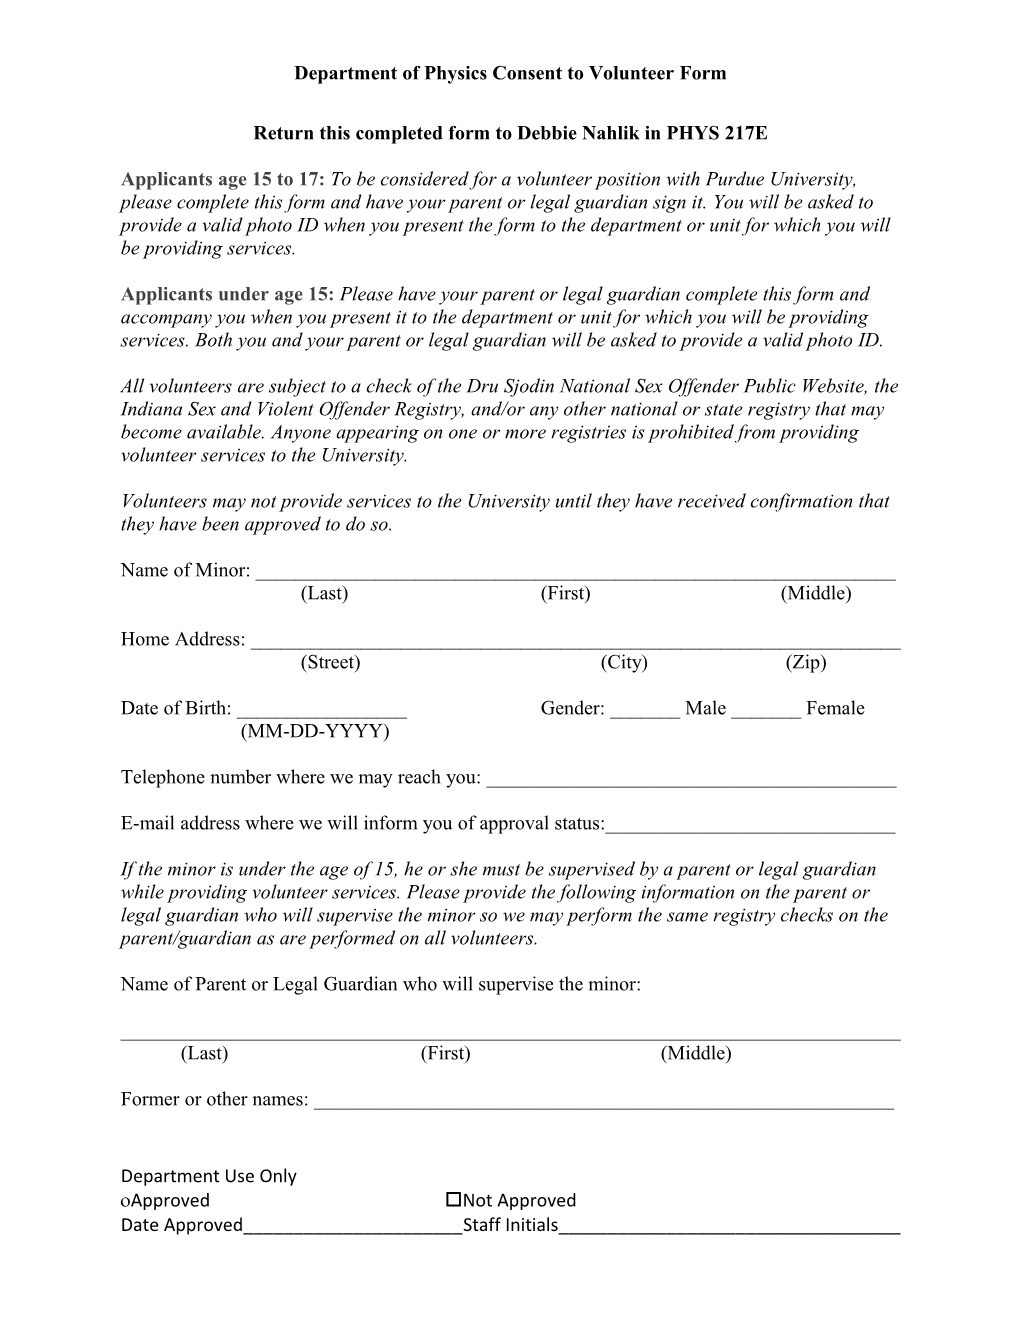 Department of Physics Consent to Volunteer Form